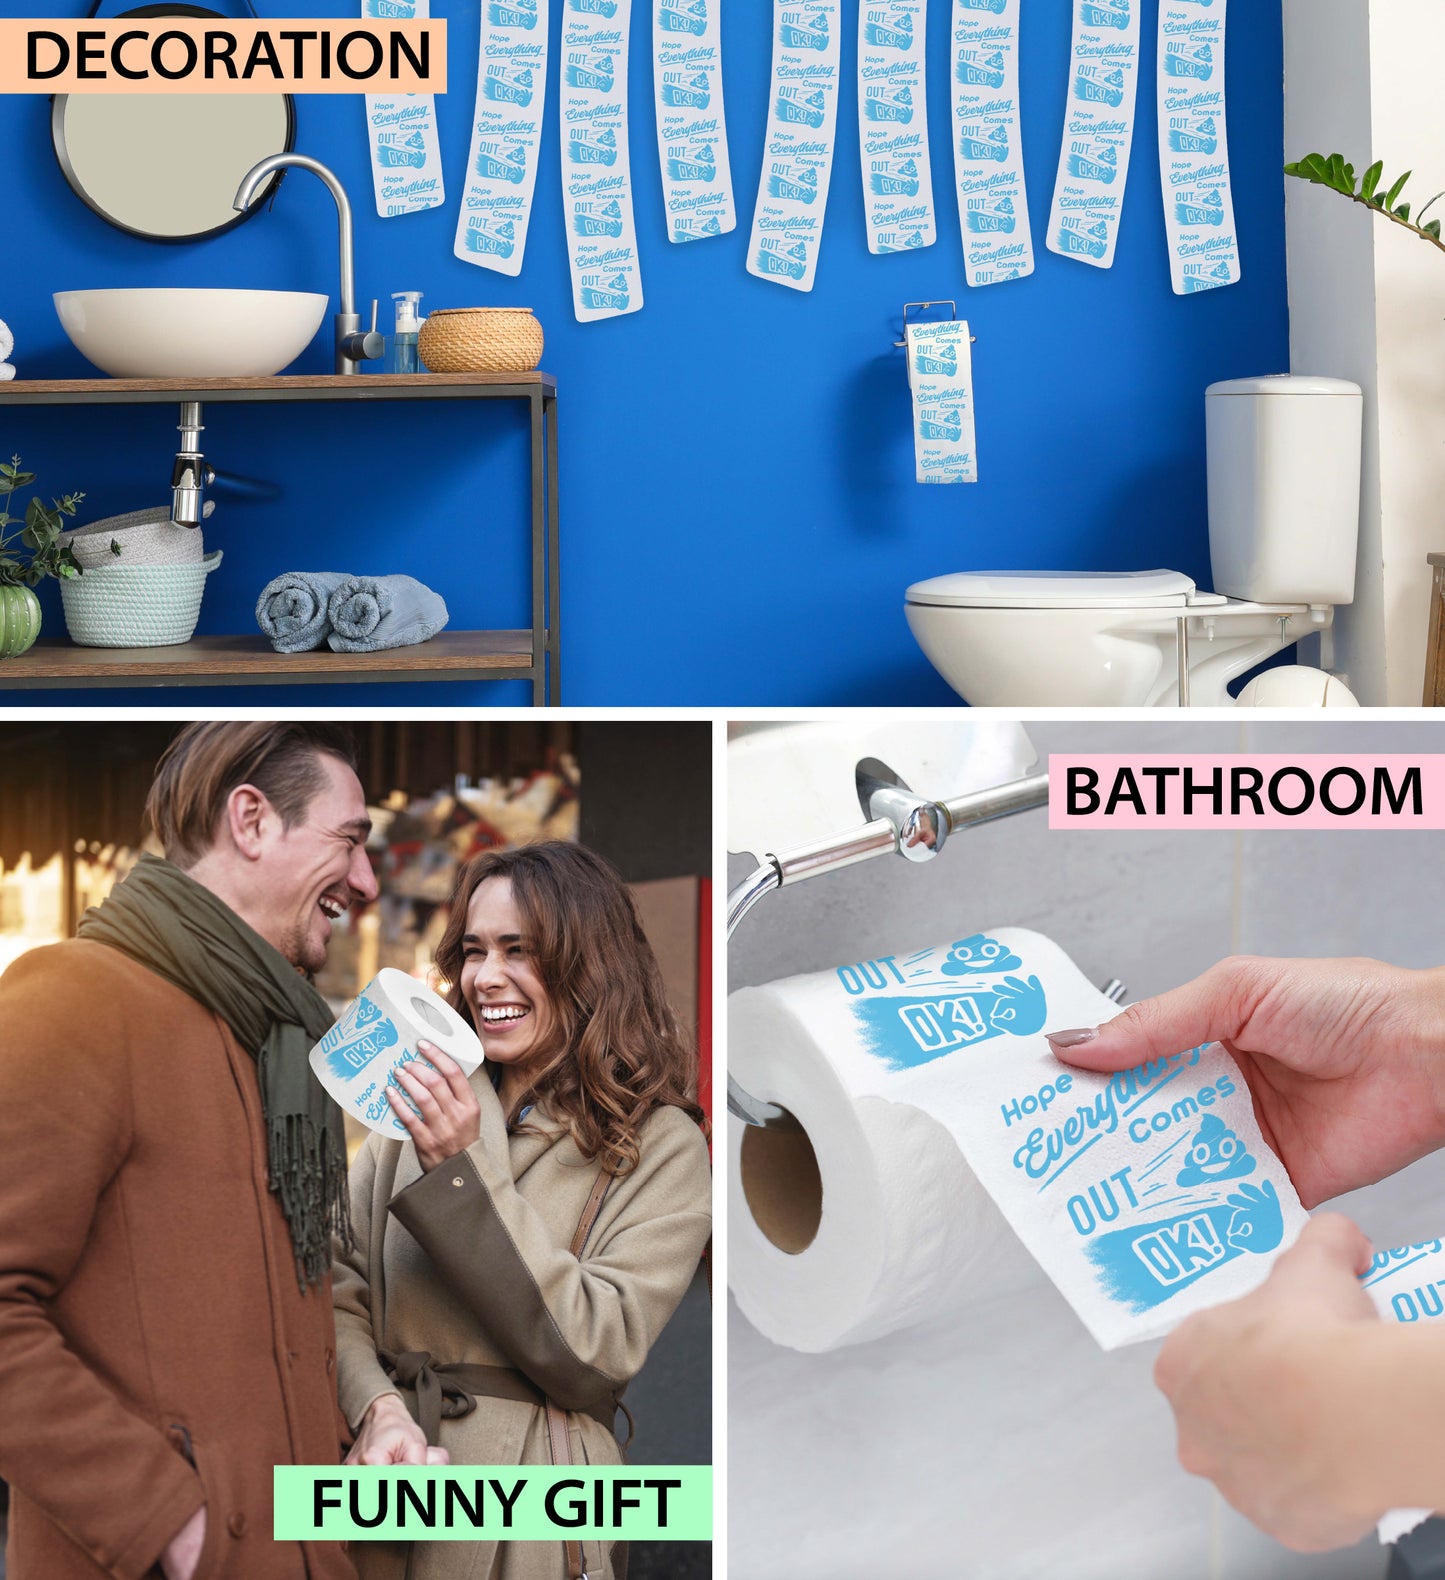 Printed TP Hope Everything Comes Out OK Printed Toilet Paper Gift – 500 Sheets